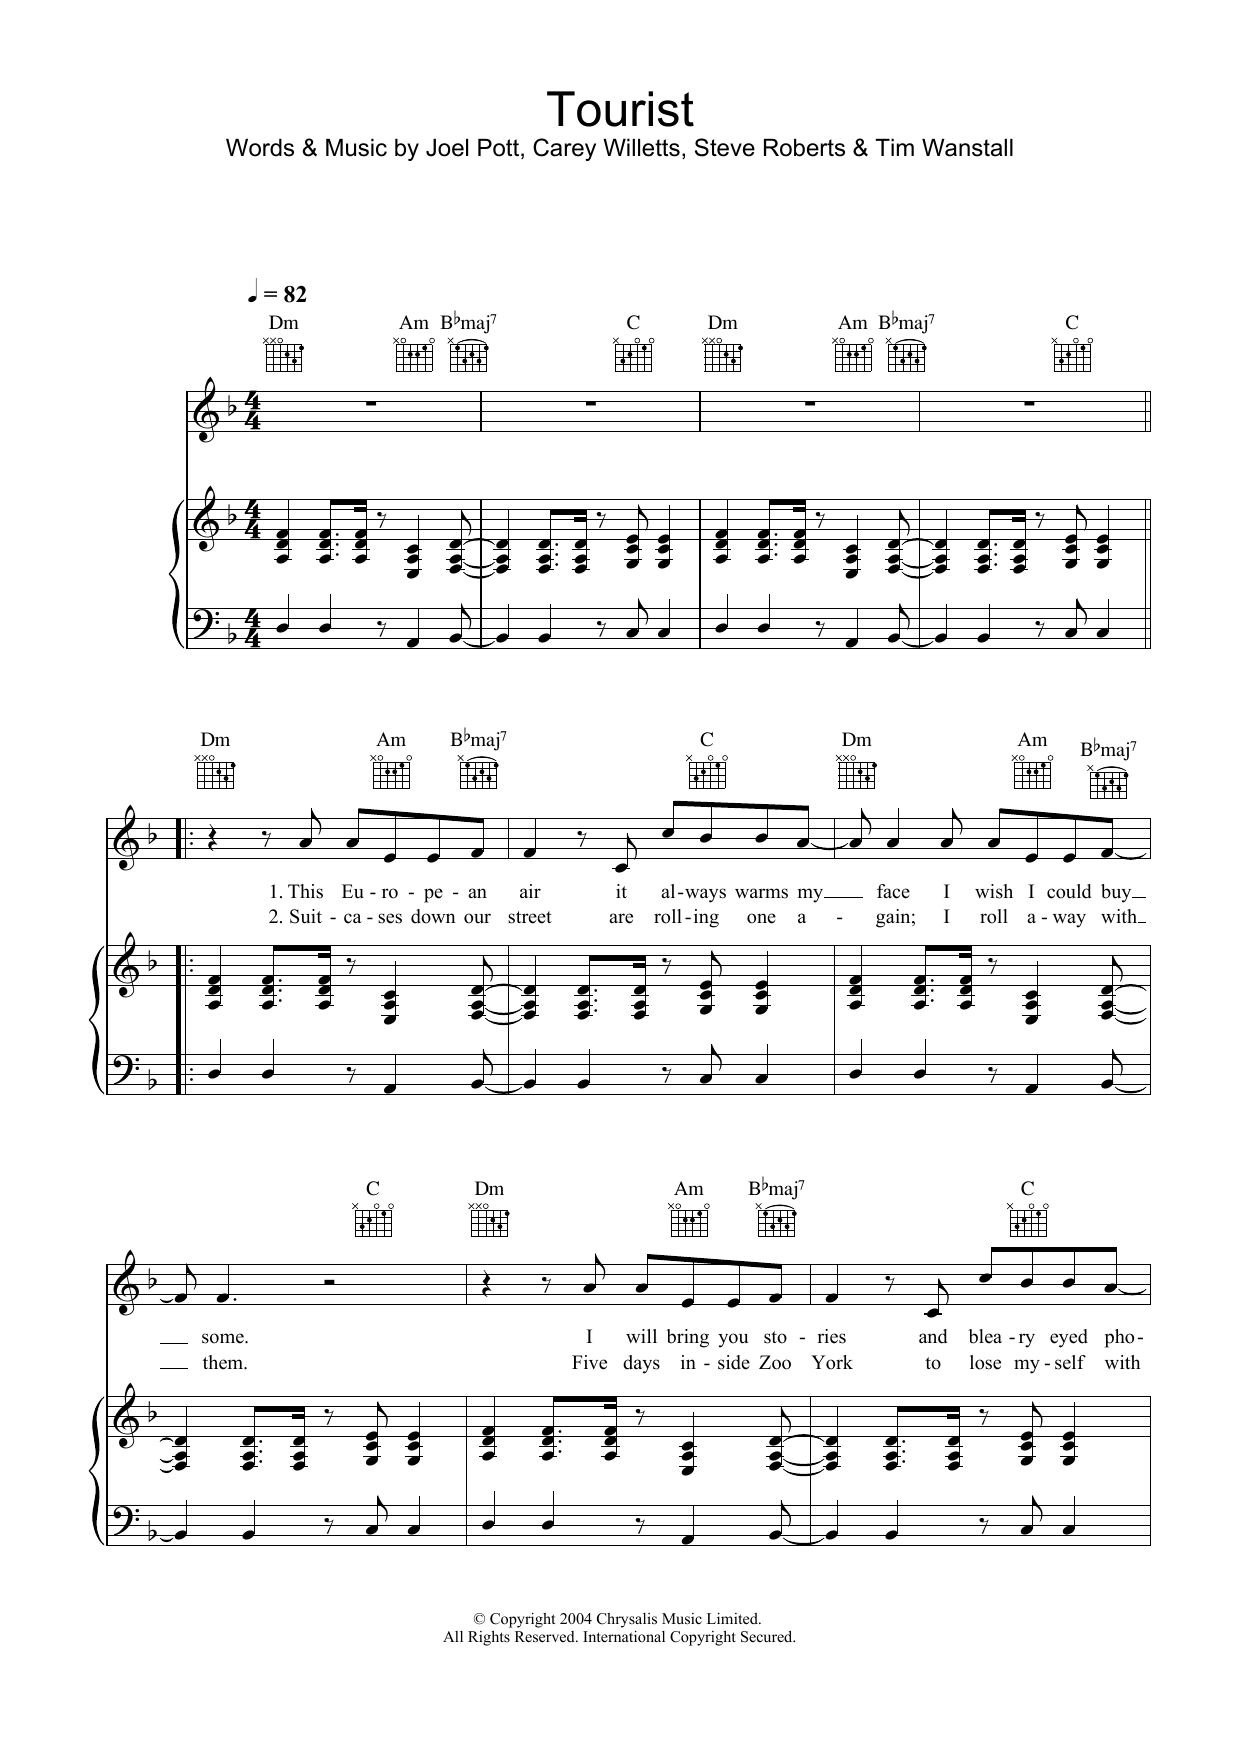 Athlete Tourist sheet music preview music notes and score for Piano, Vocal & Guitar including 5 page(s)